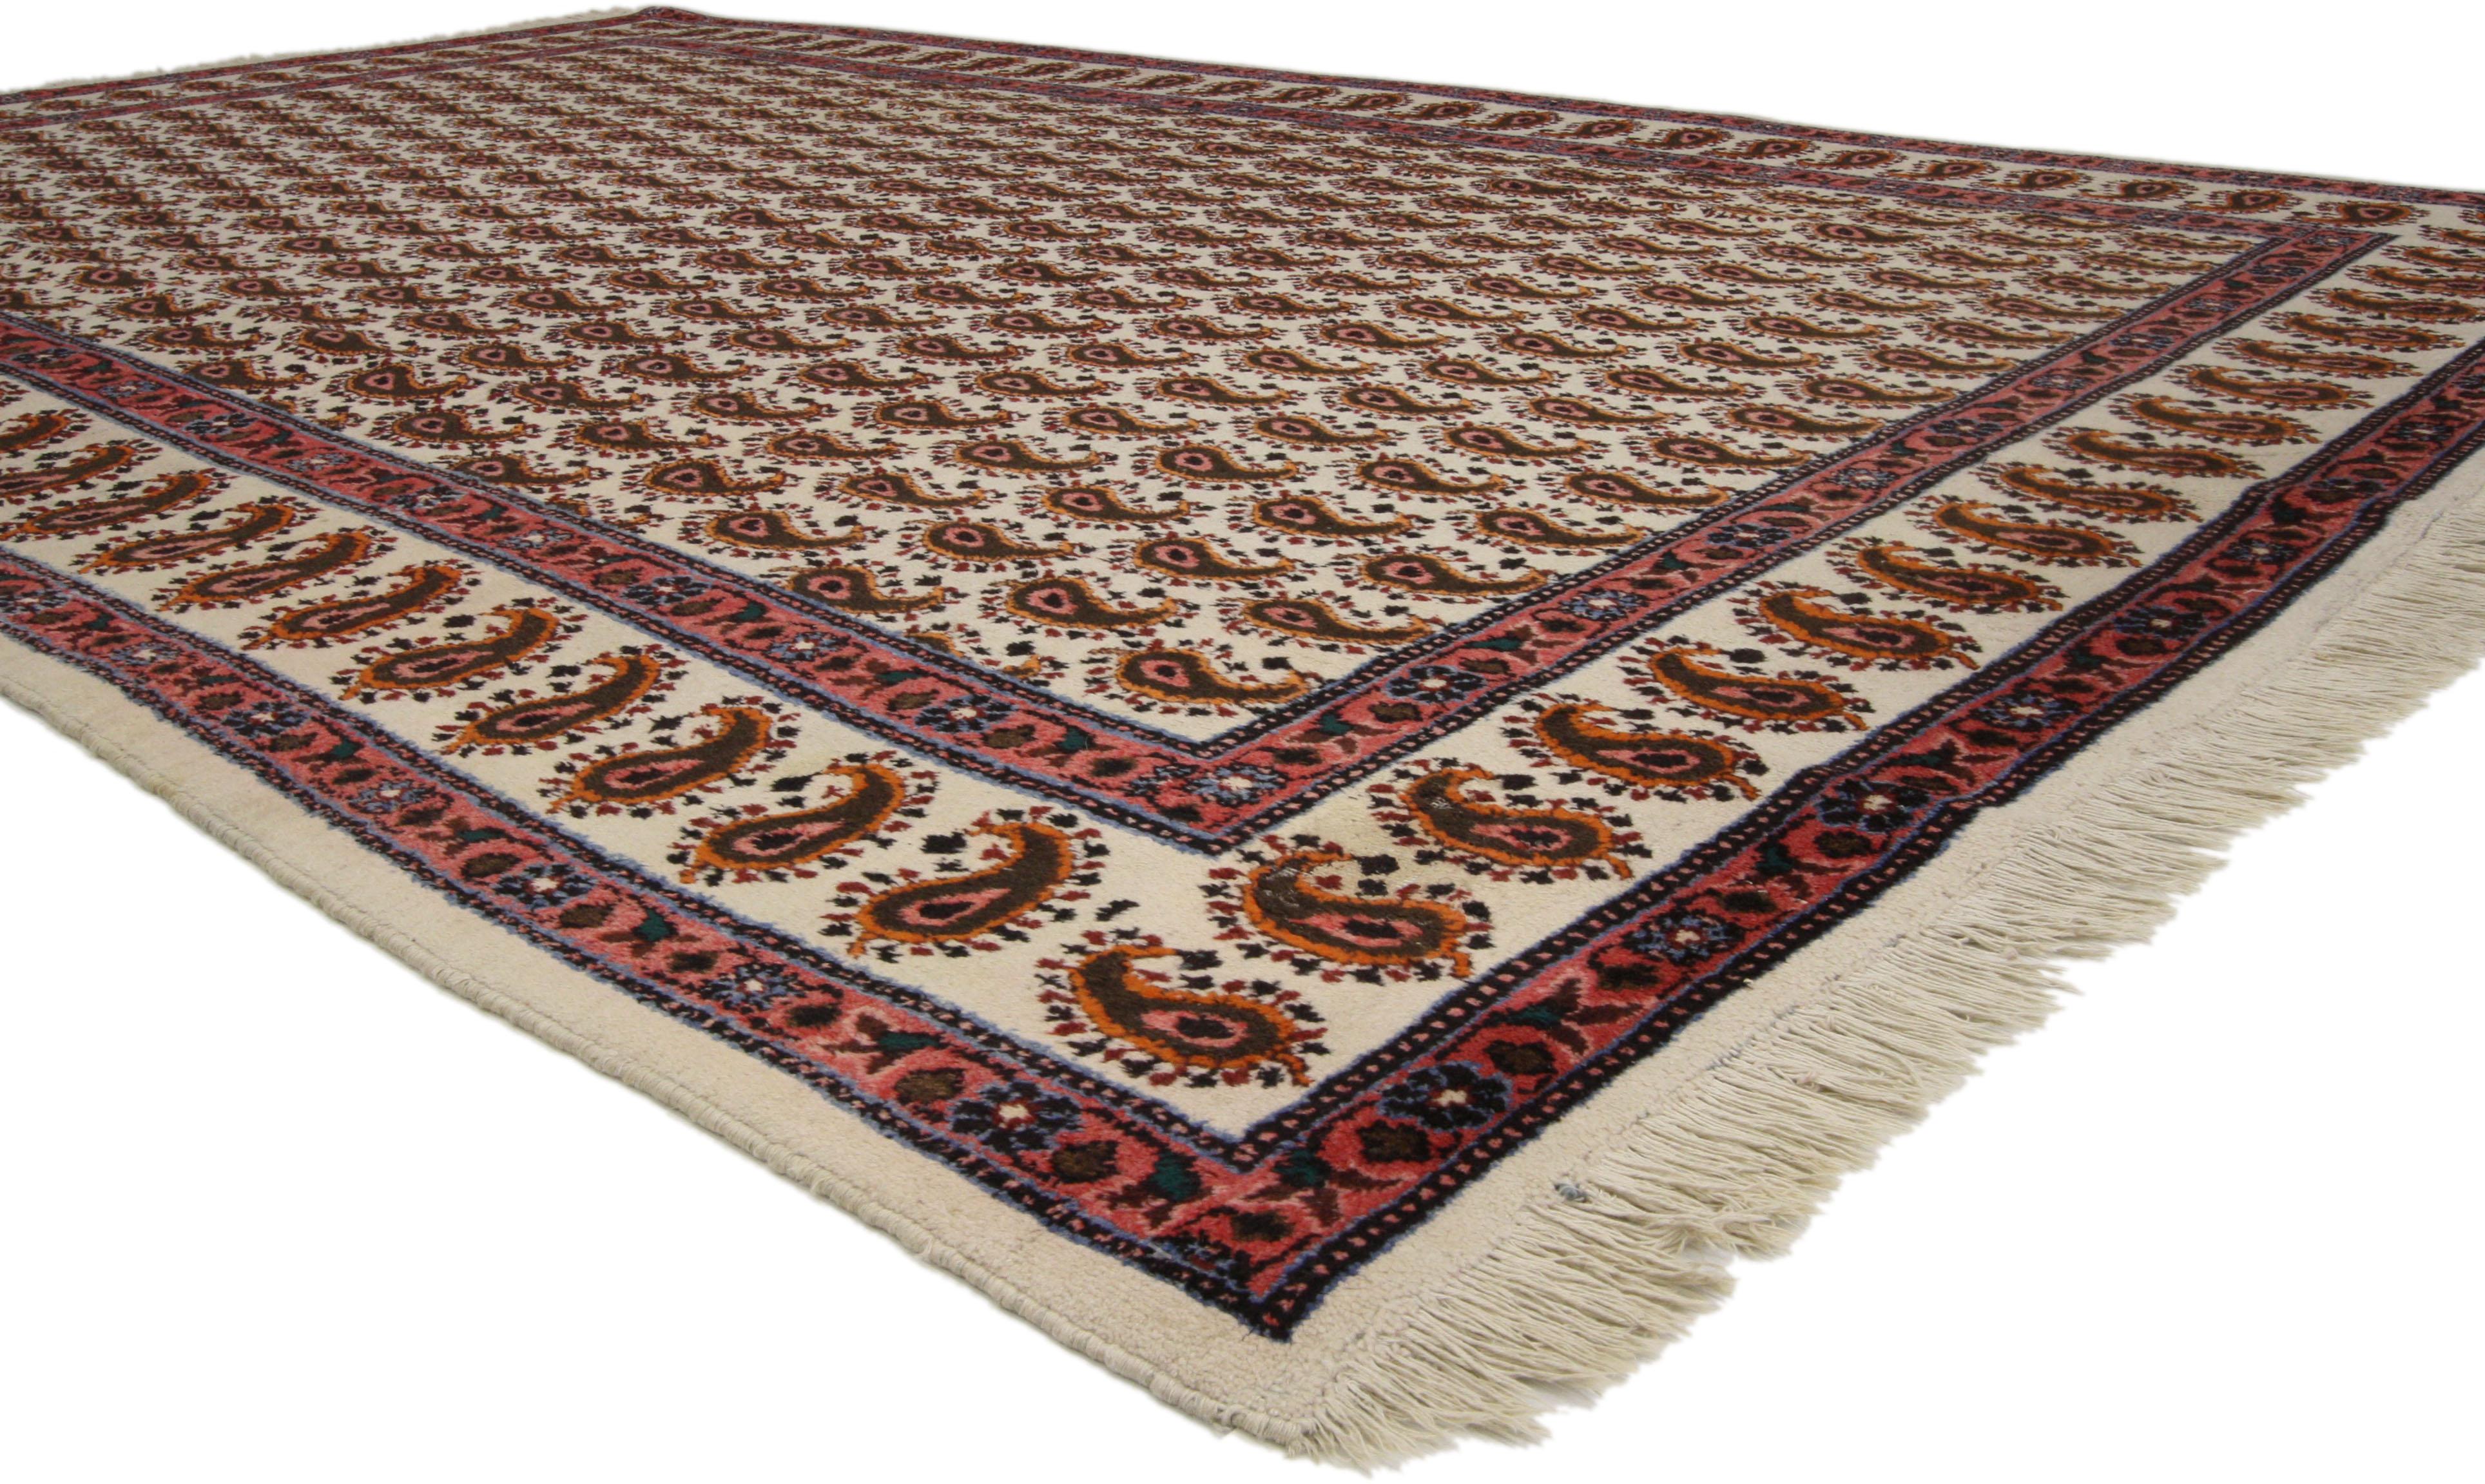 72007, vintage Persian Mood rug with all-over Boteh pattern. This hand-knotted wool vintage Persian Mood rug features an allover pattern of the boteh, or paisley, motif throughout the field and primary border. Two red and blue guard borders flank